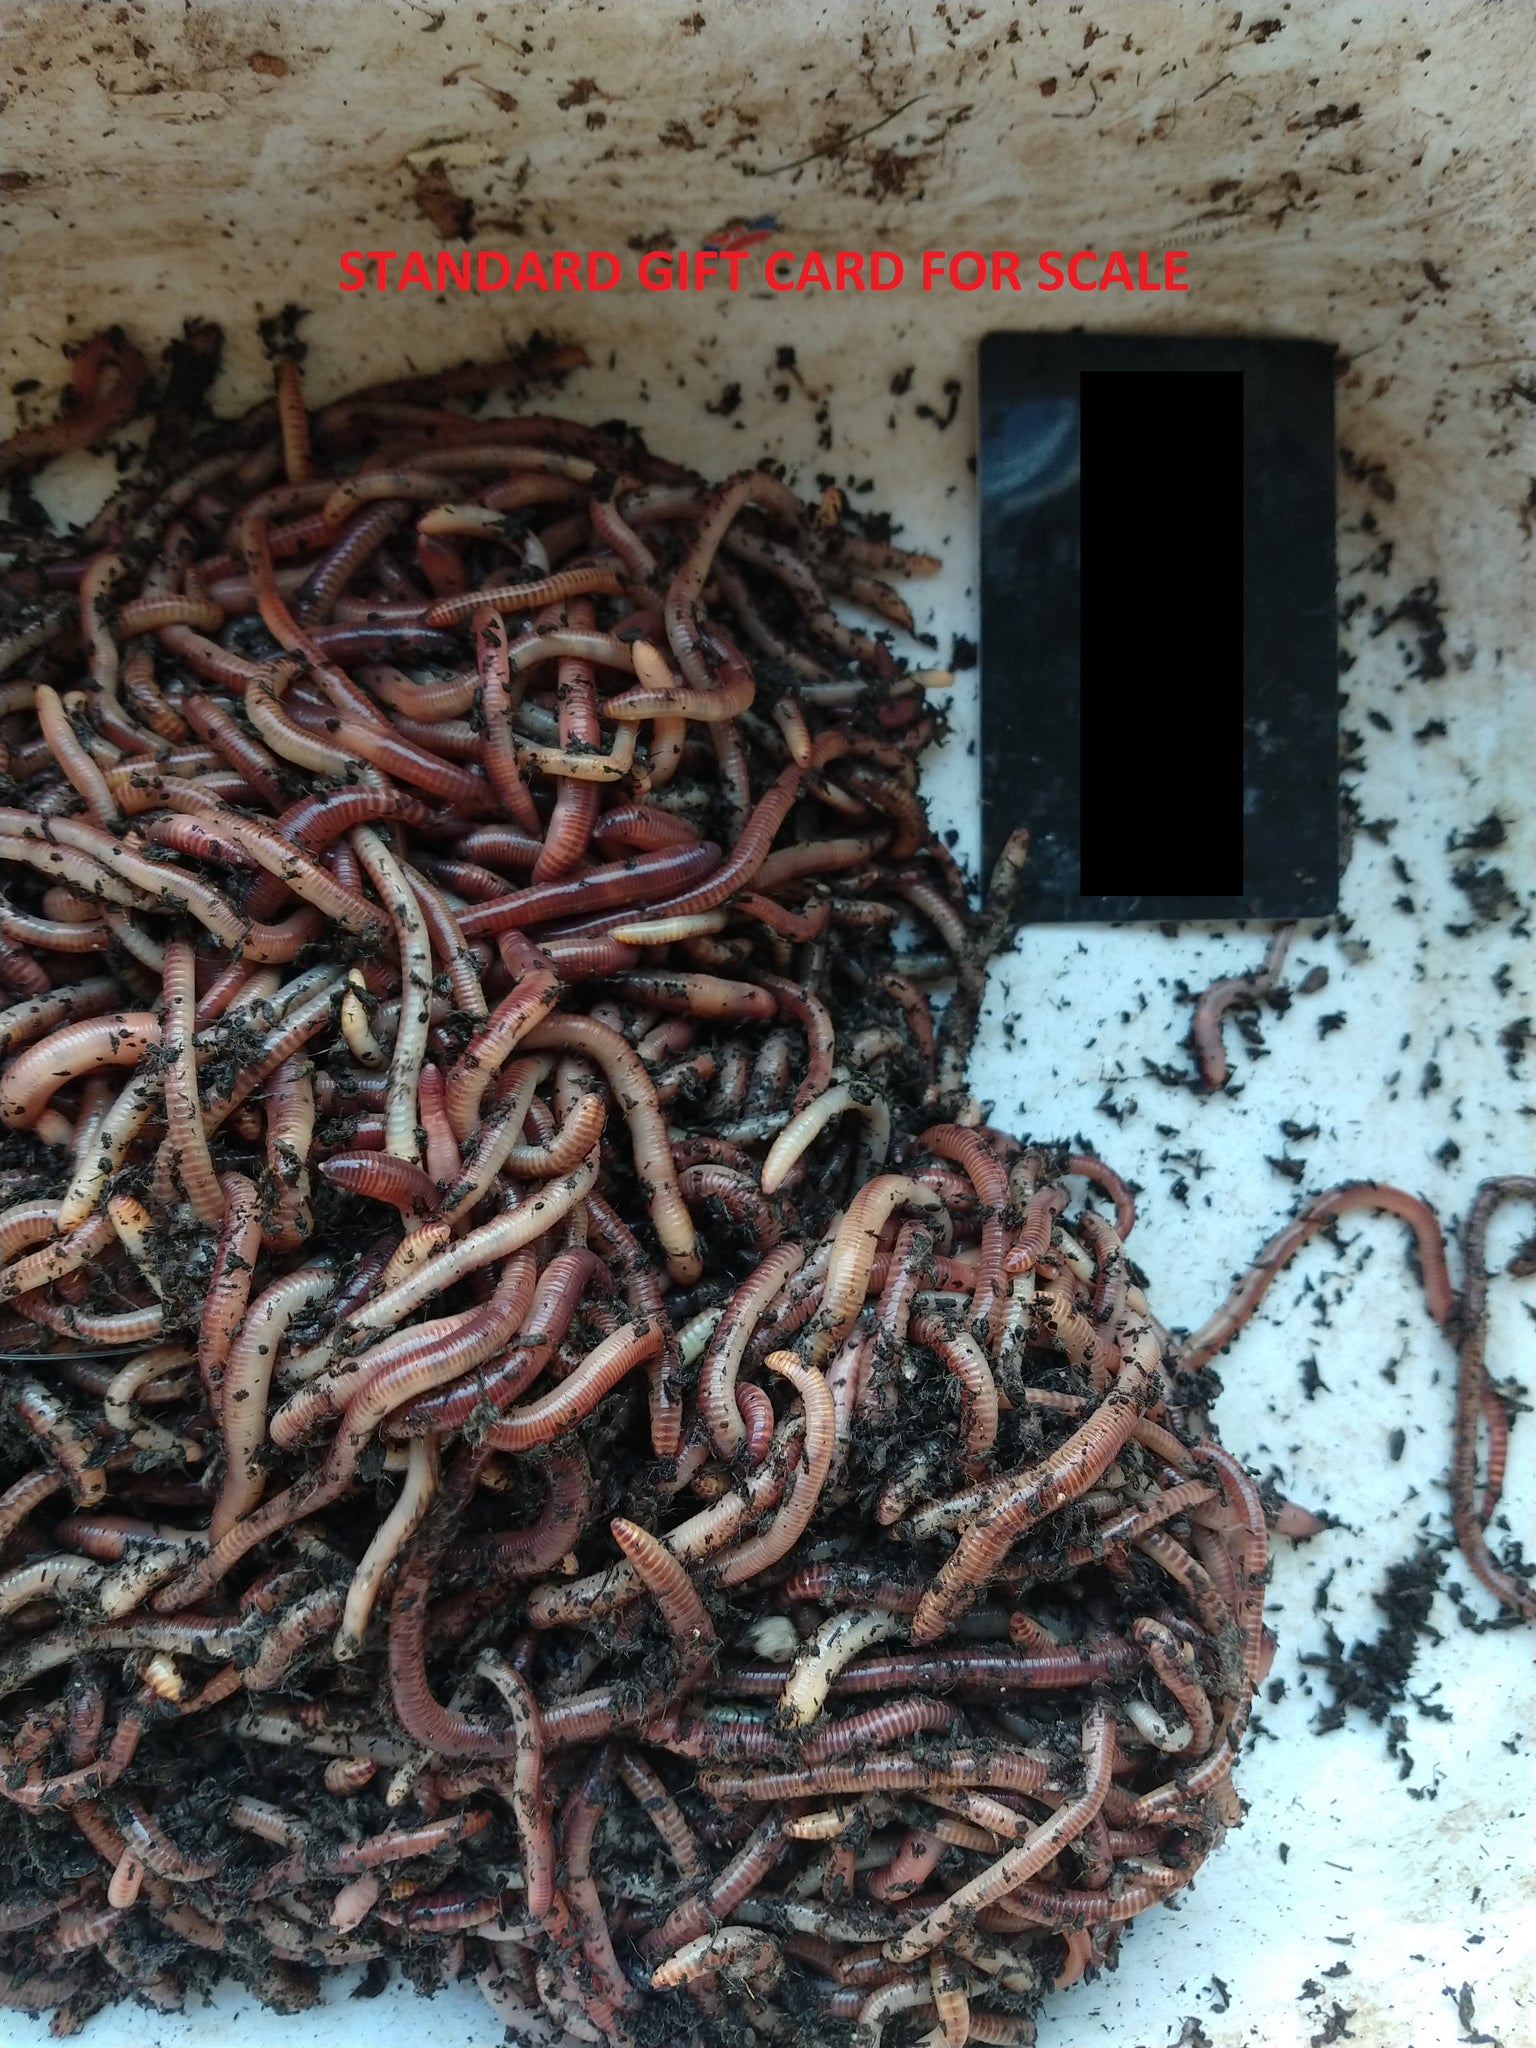 Buy European Nightcrawlers for Fishing/Composting - Midwest Worms